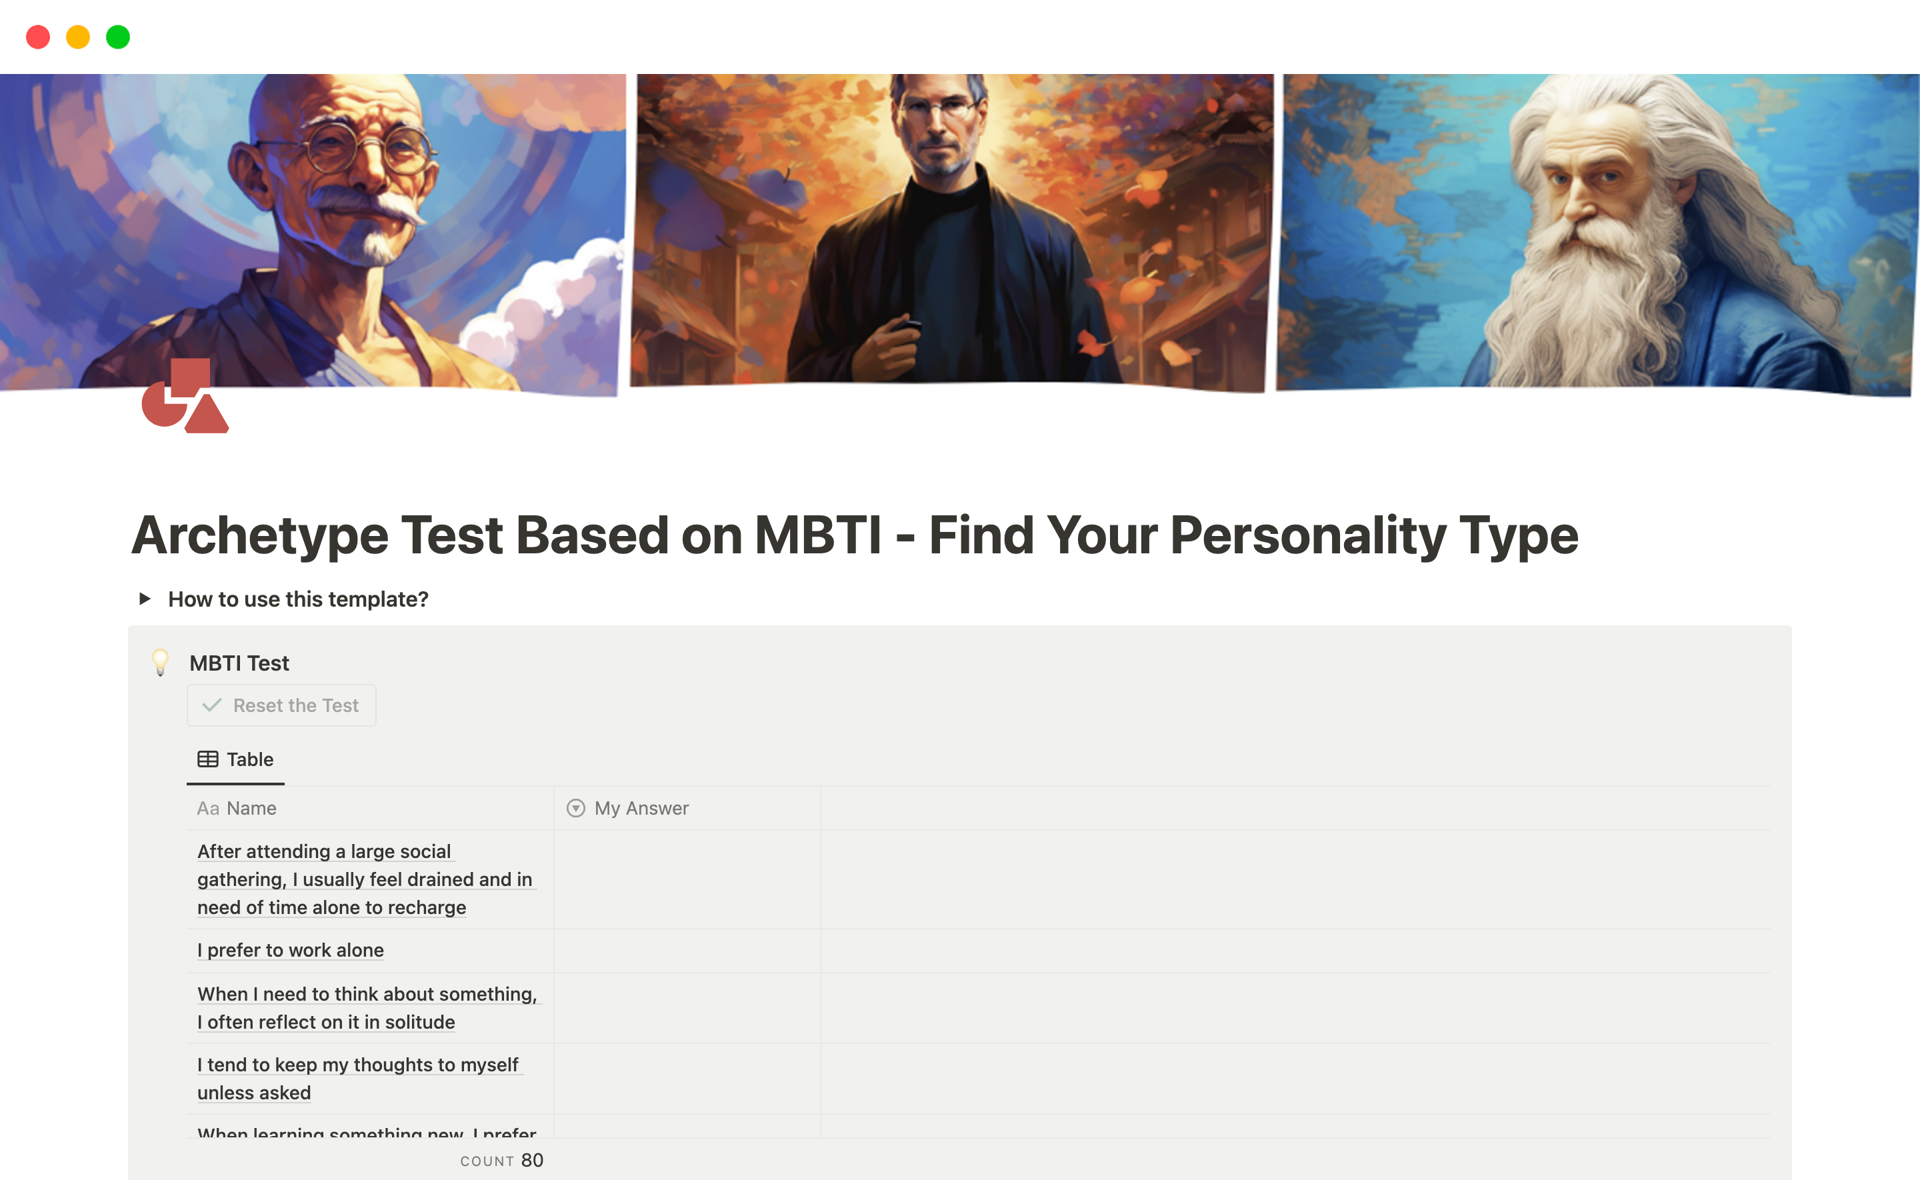 Myers Briggs Personality Test: Let's Explore Your Personality Type!